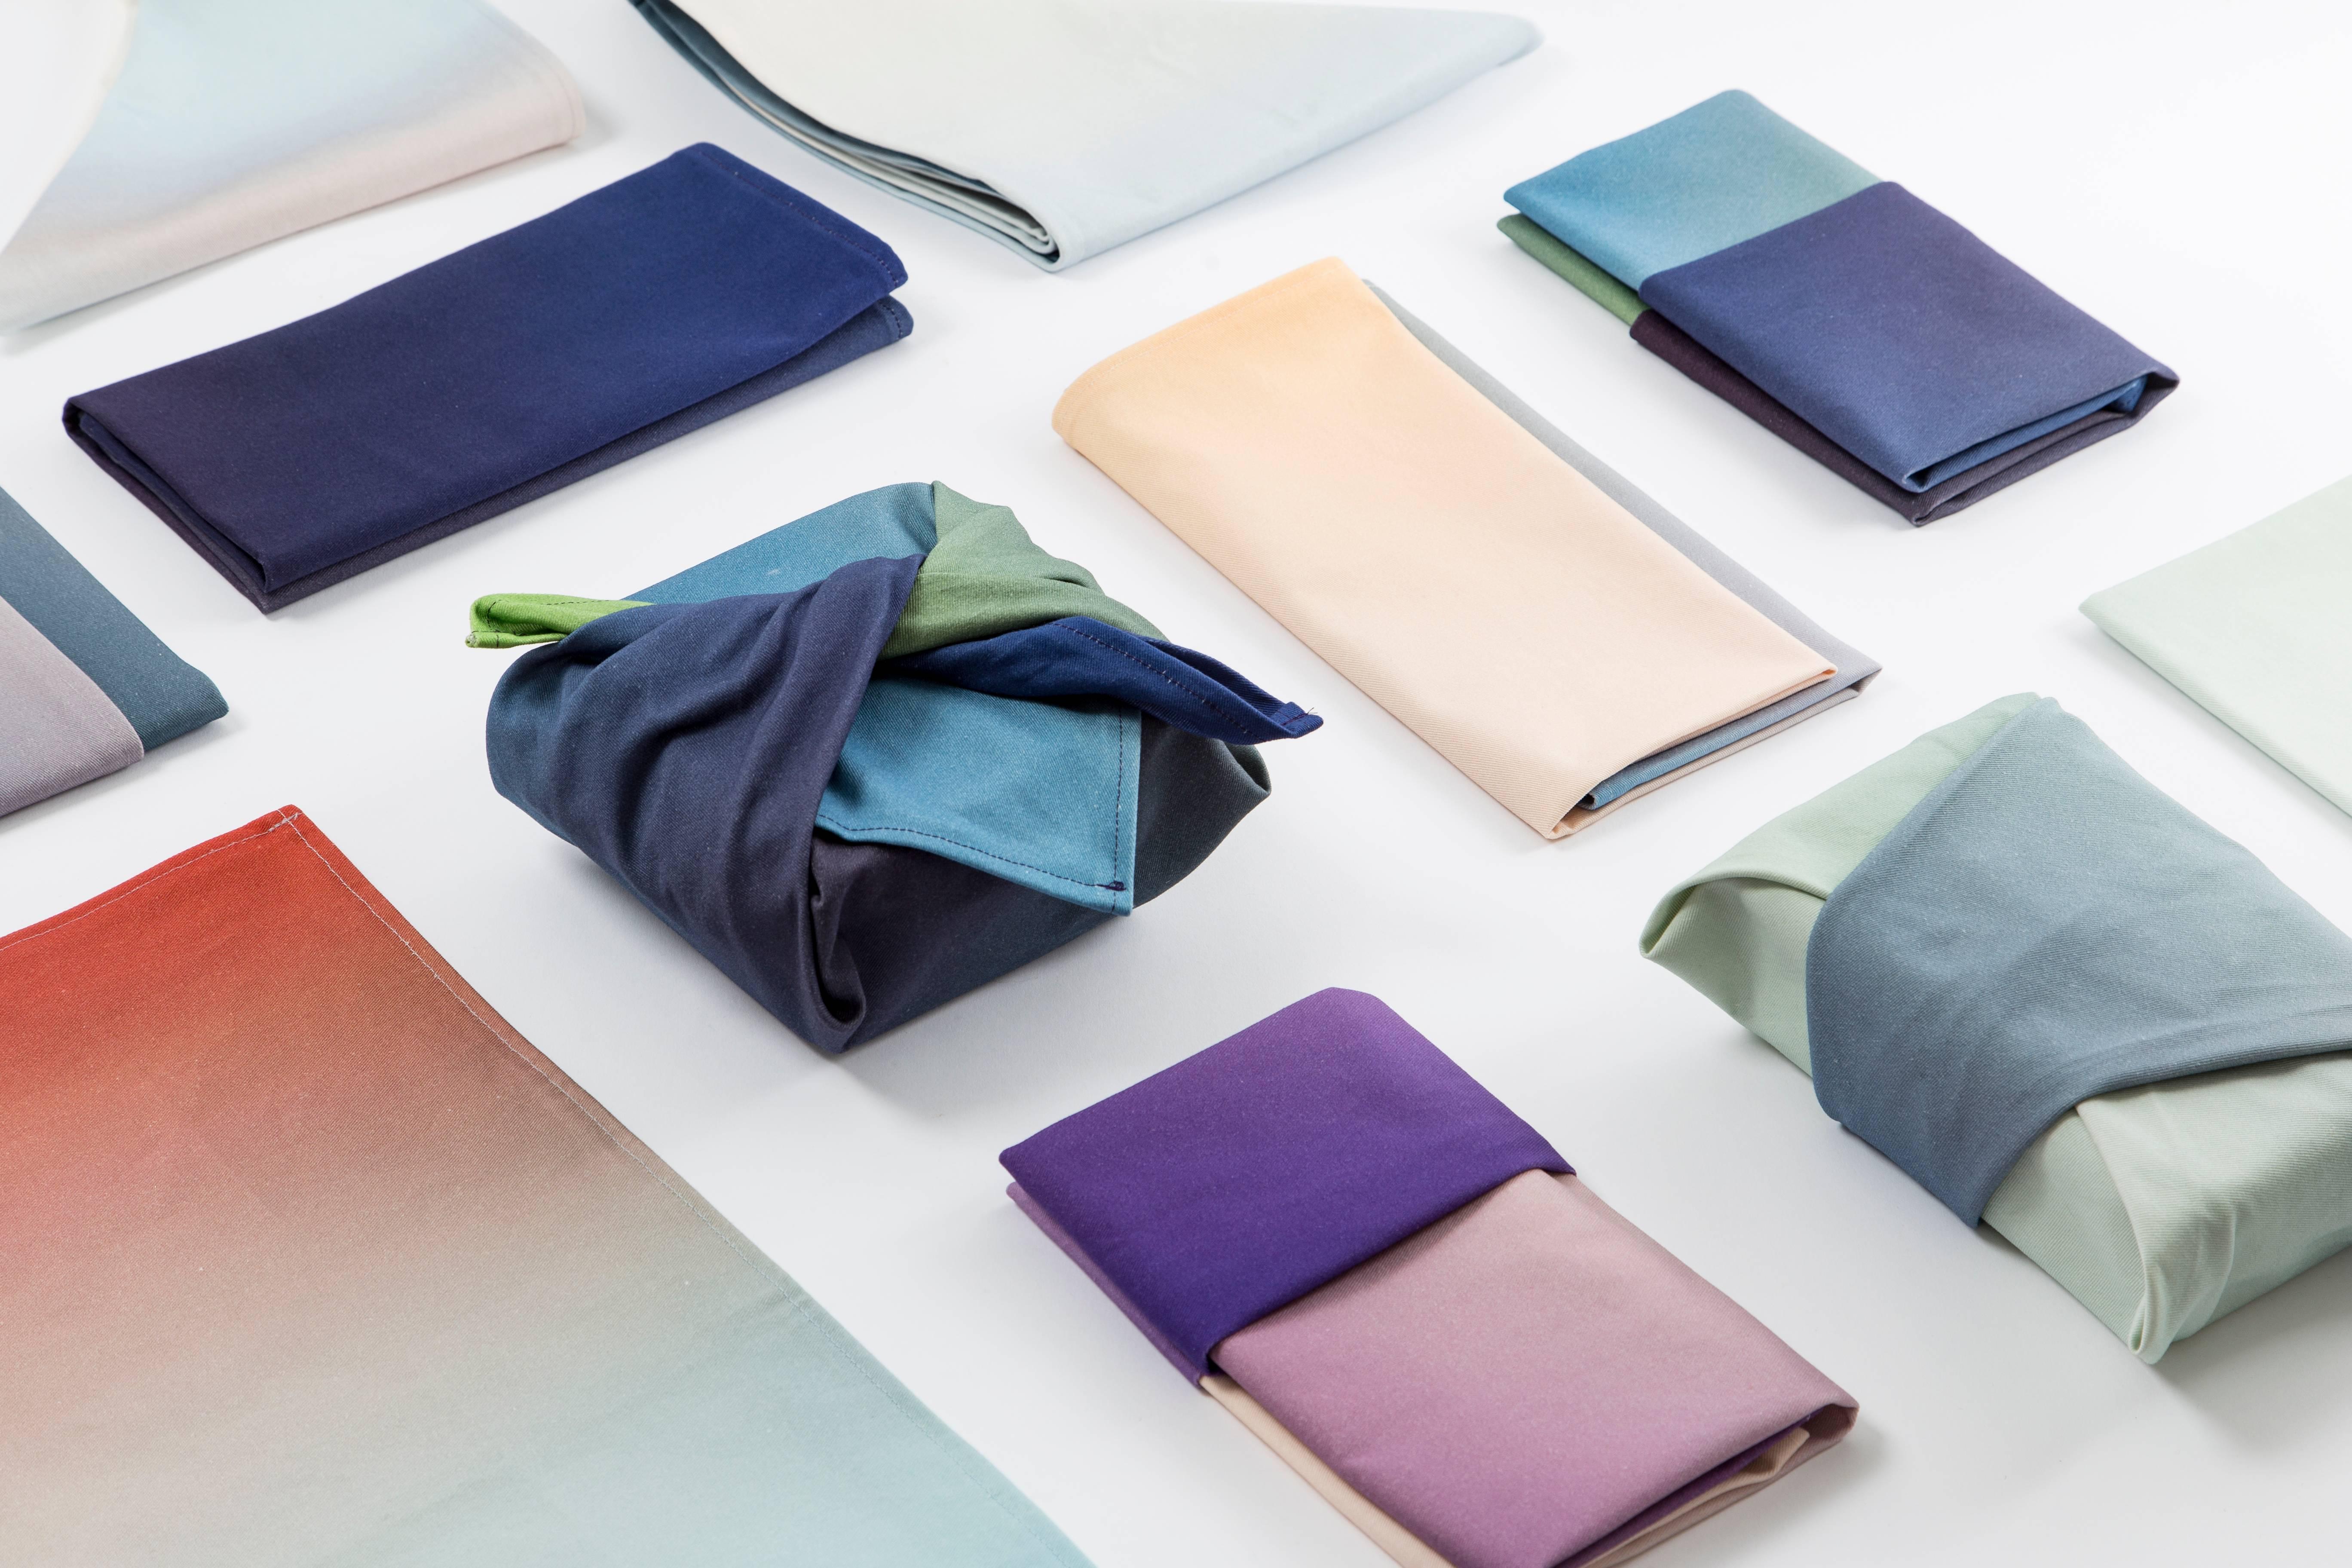 Hues Tea Towels is a collection of color experiments turned into usable cotton tea towels and napkins. Each fold revelas a new color and composition. 
These kitchen cloths can be used as tea towels, place mats, wrapping cloths or table runners. The